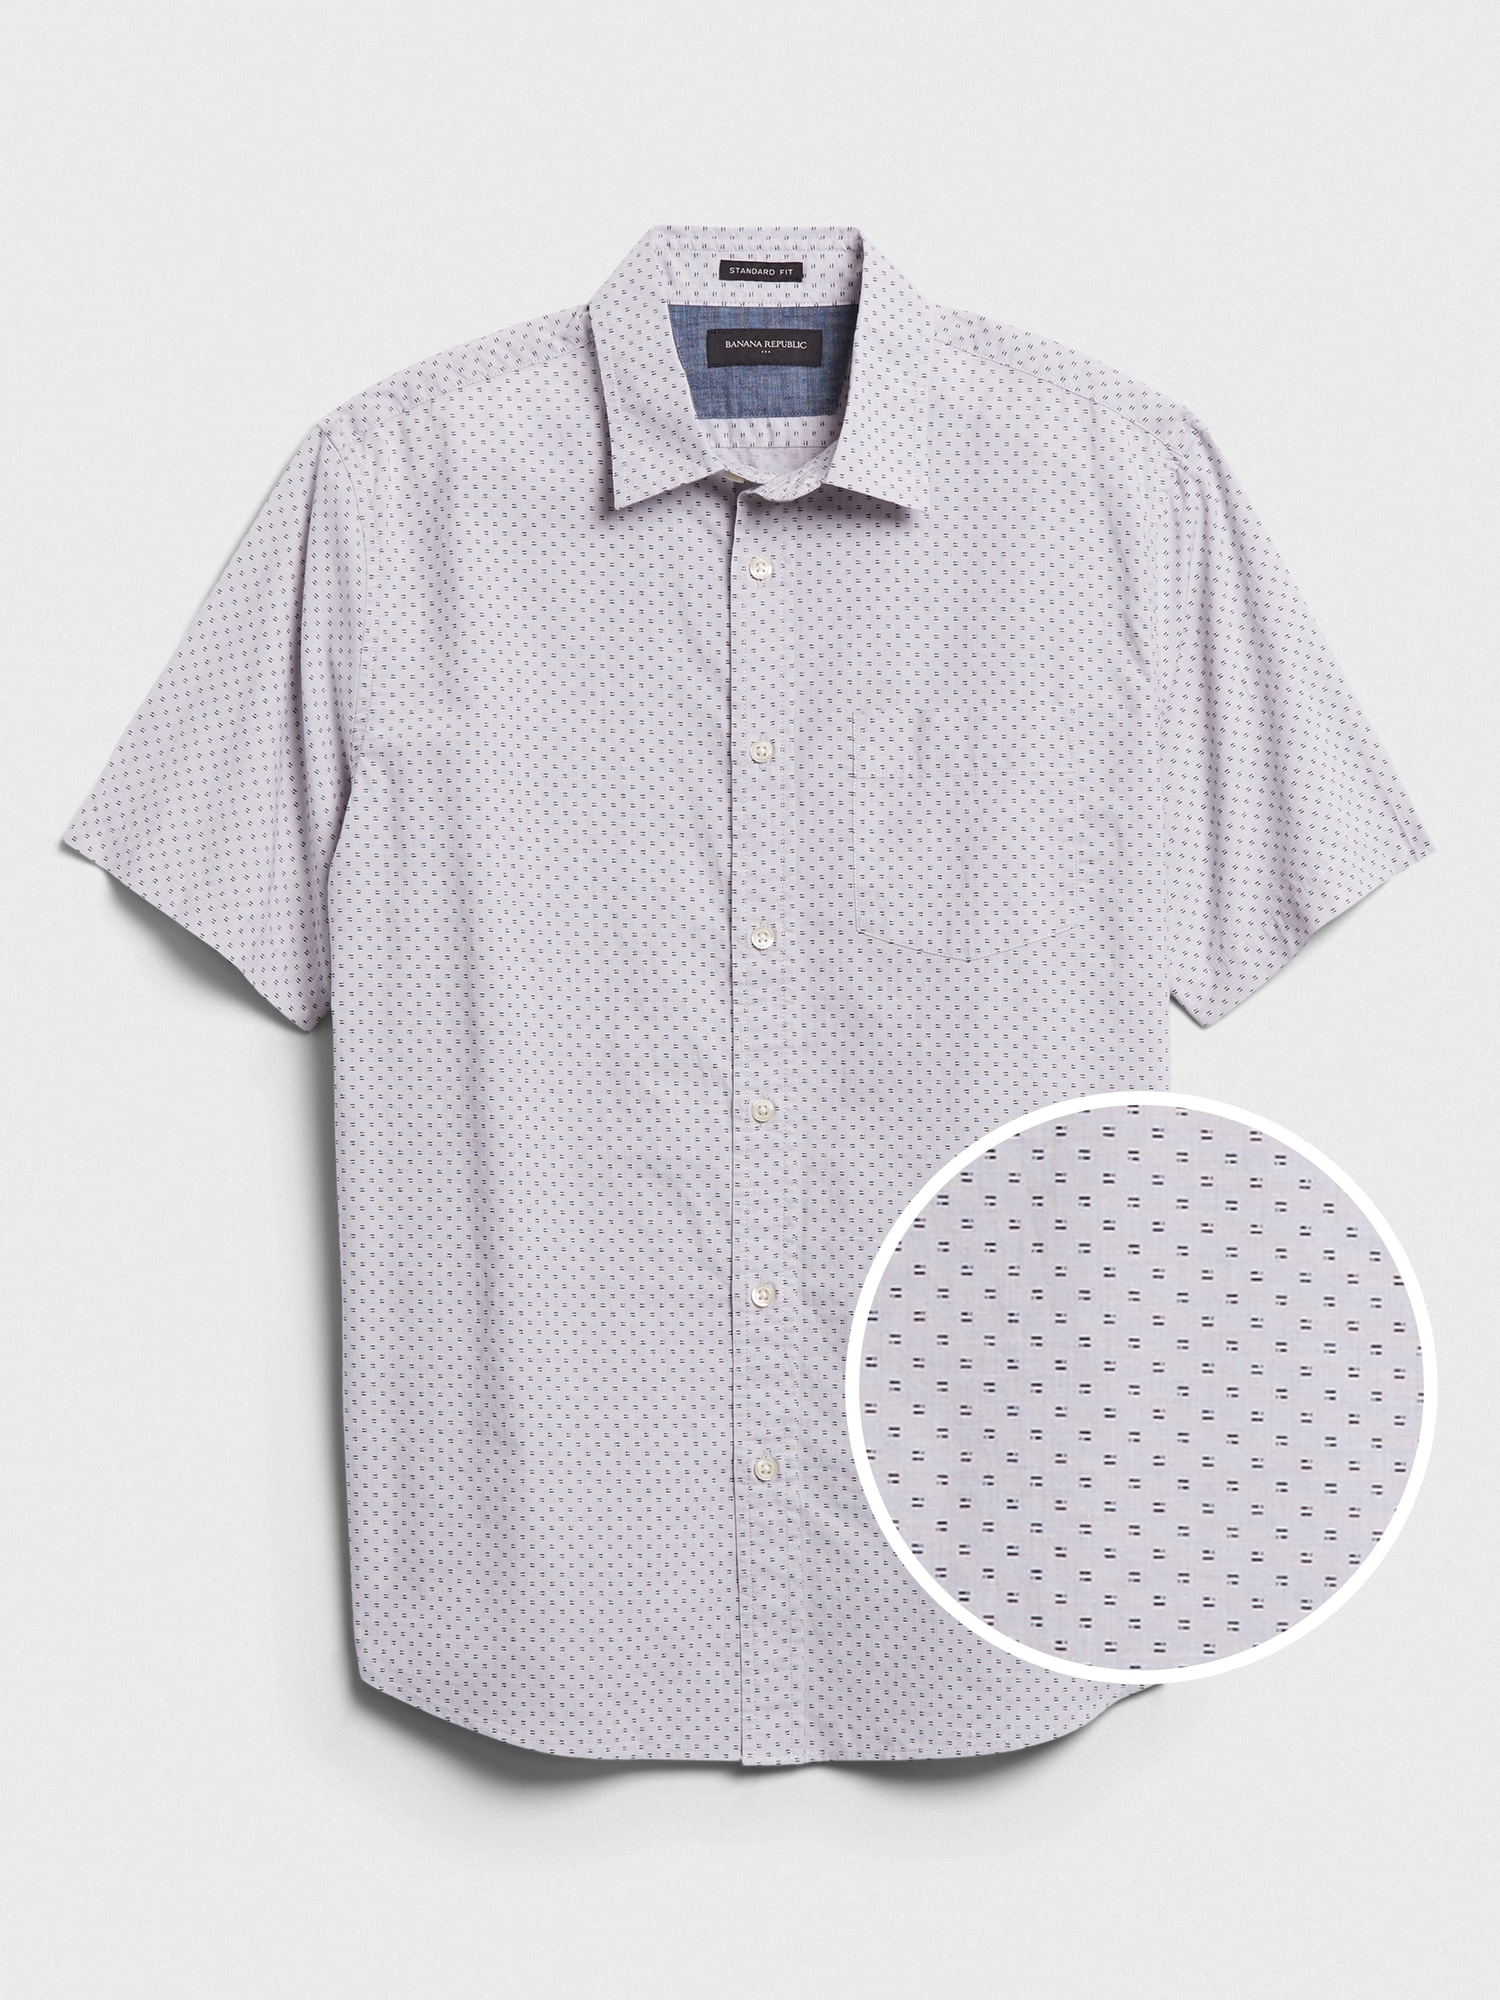 Made with Organically Grown Cotton Shirt